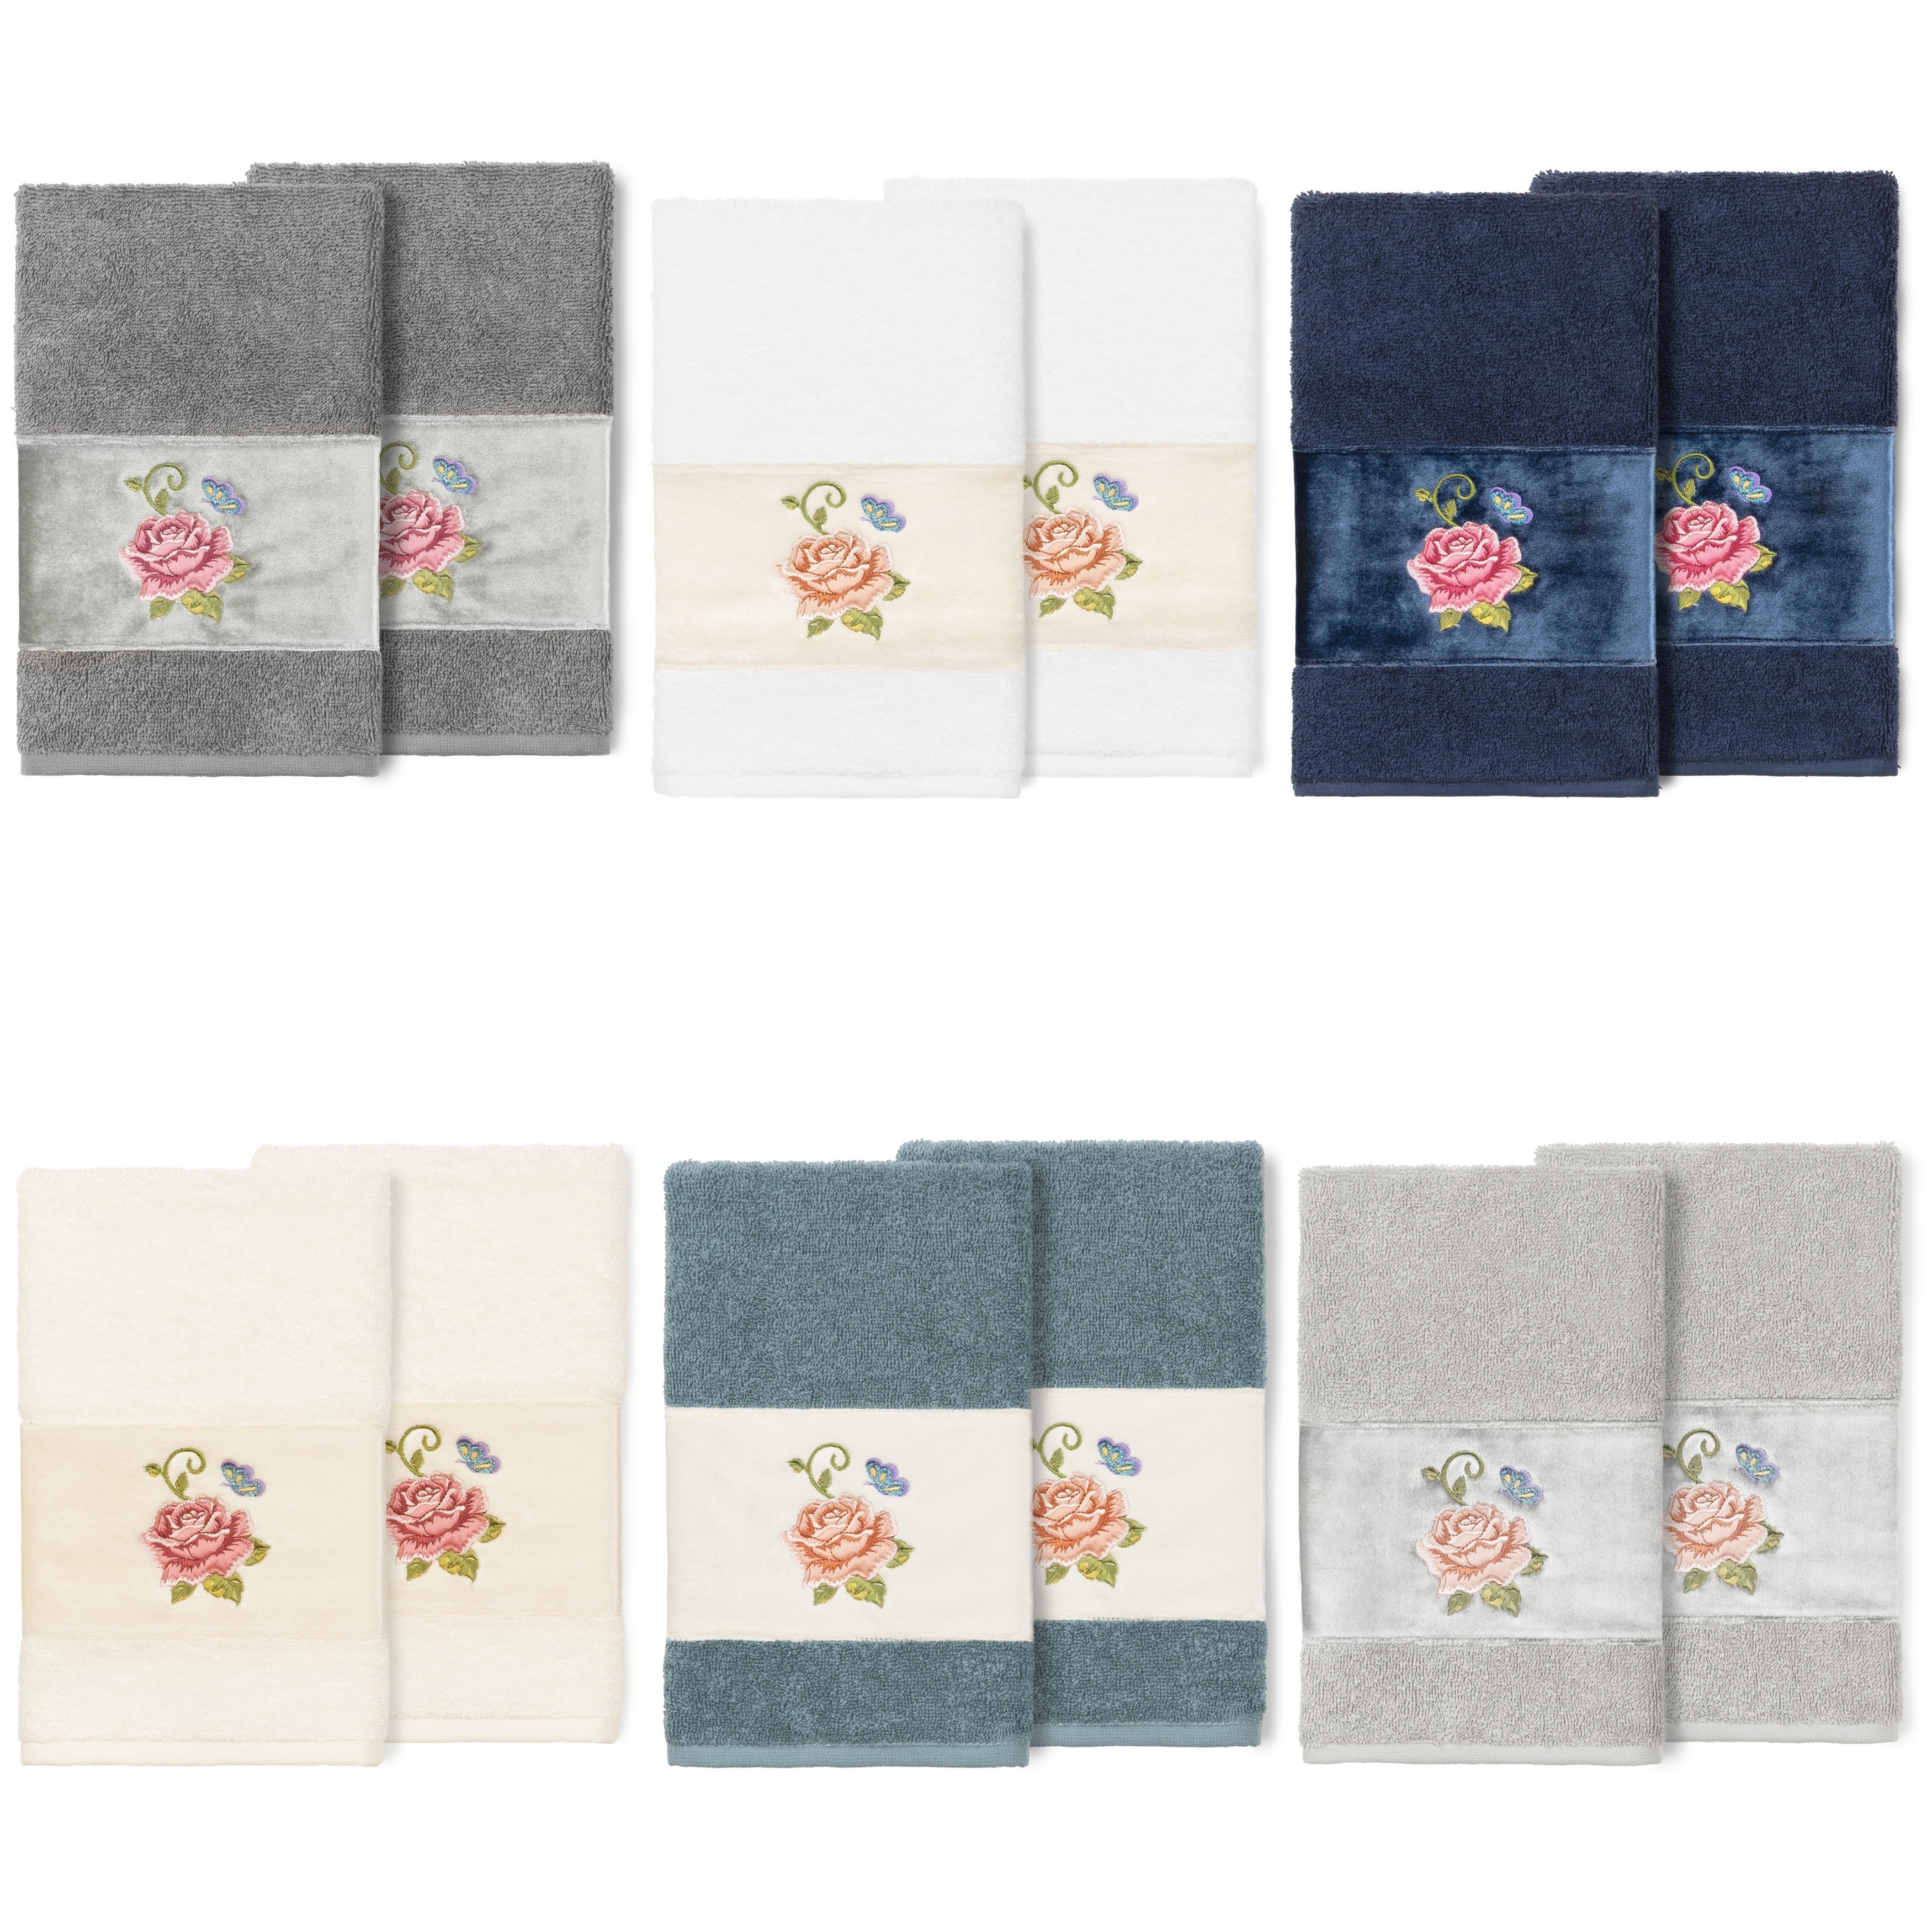 https://ak1.ostkcdn.com/images/products/28728177/Authentic-Hotel-and-Spa-100-Turkish-Cotton-Rebecca-2PC-Embellished-Hand-Towel-Set-352f0443-adcc-4f1a-be2f-5984b77025a5.jpg